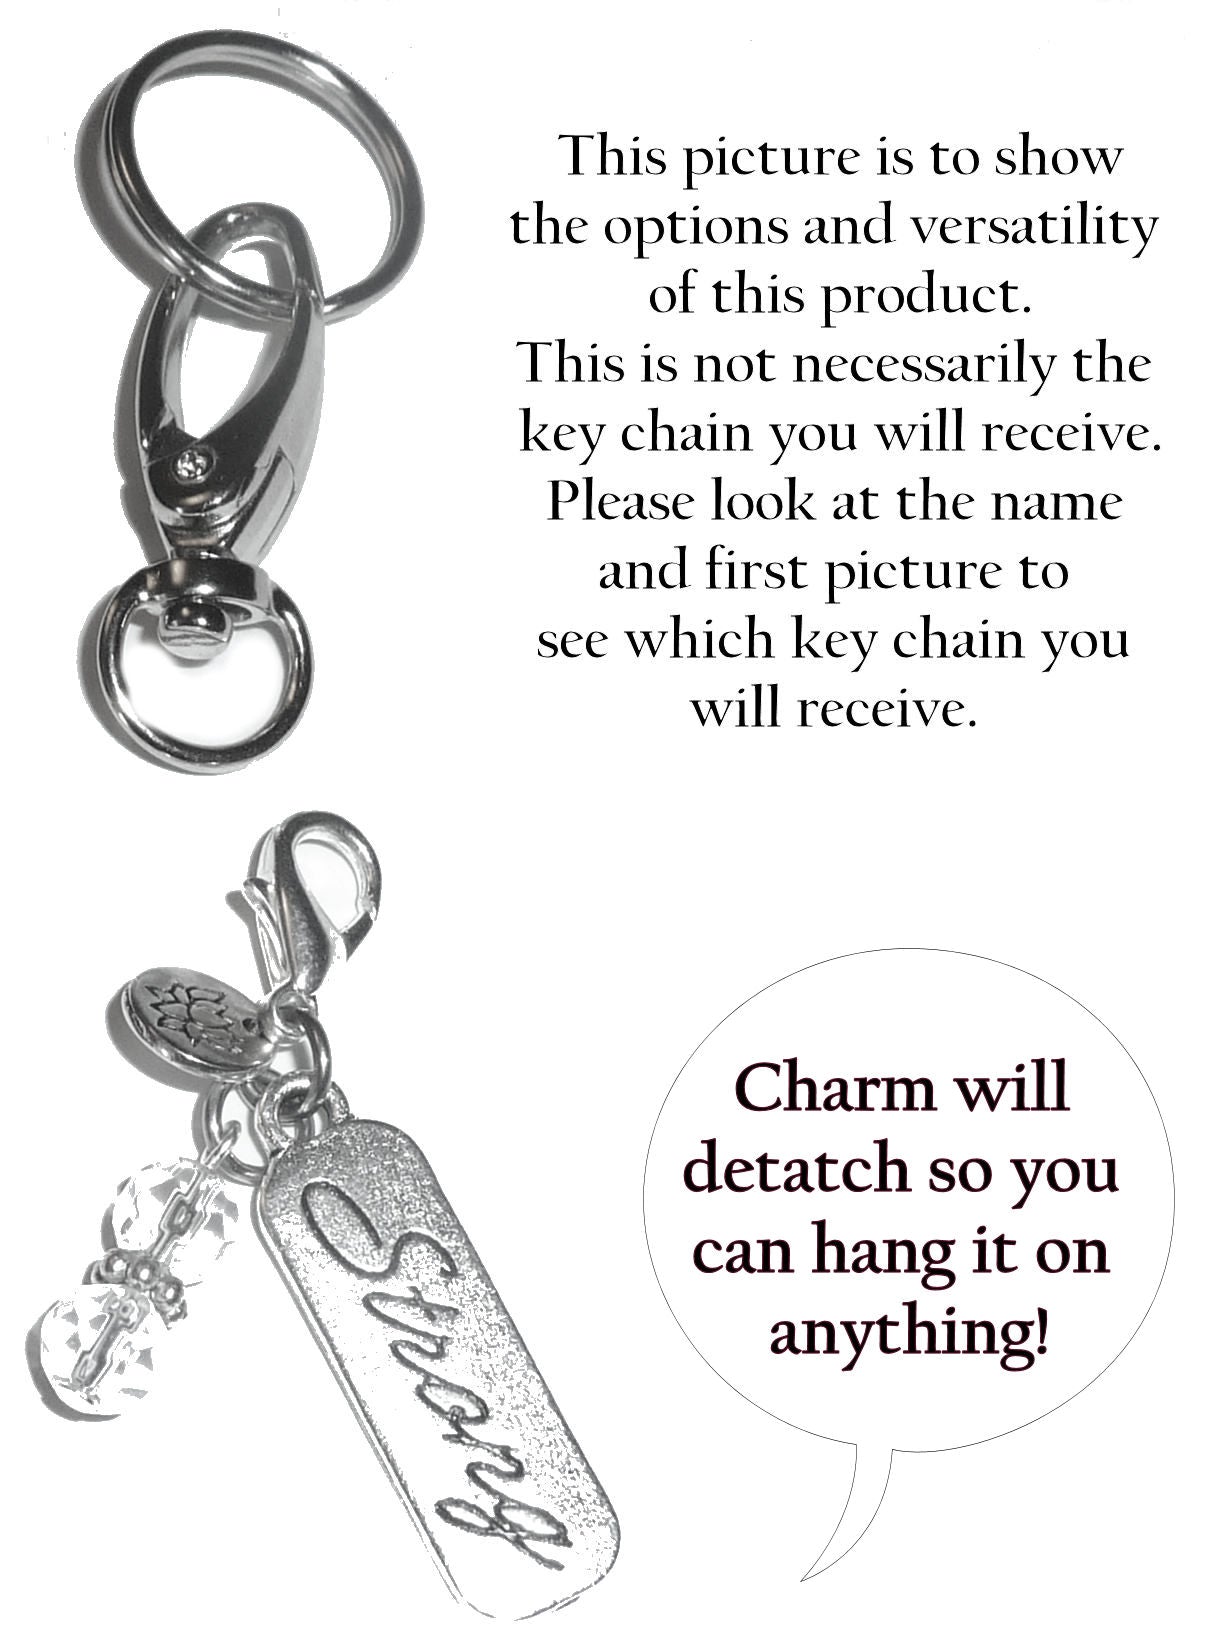 (Periwinkle (Stomach cancer)) Charm Key Chain Ring, Women's Purse or Necklace Charm, Comes in a Gift Box!